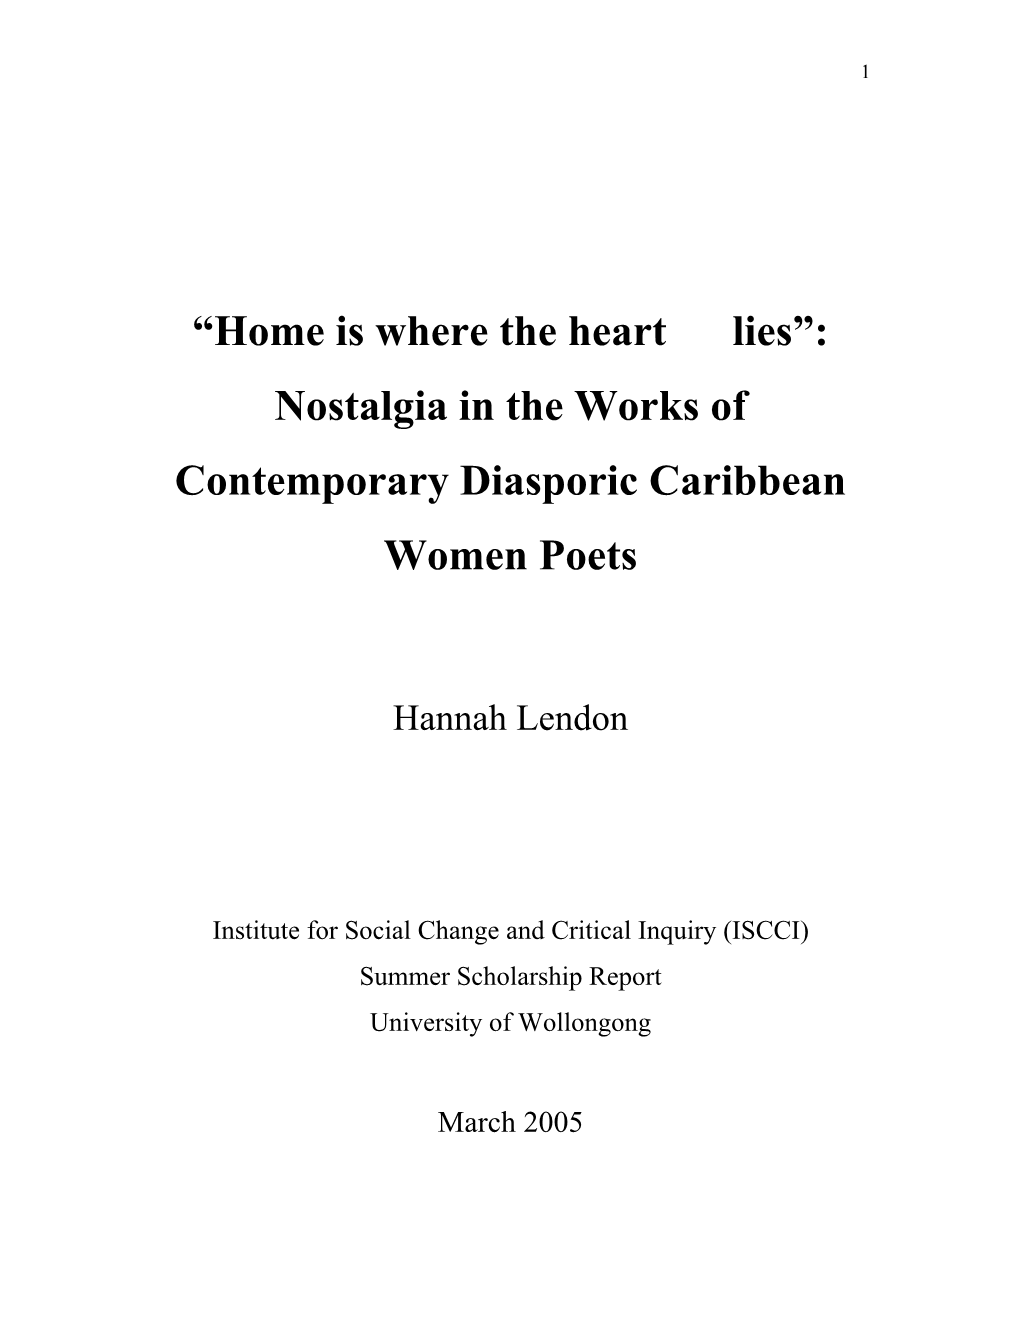 “Home Is Where the Heart Lies”: Nostalgia in the Works of Contemporary Diasporic Caribbean Women Poets